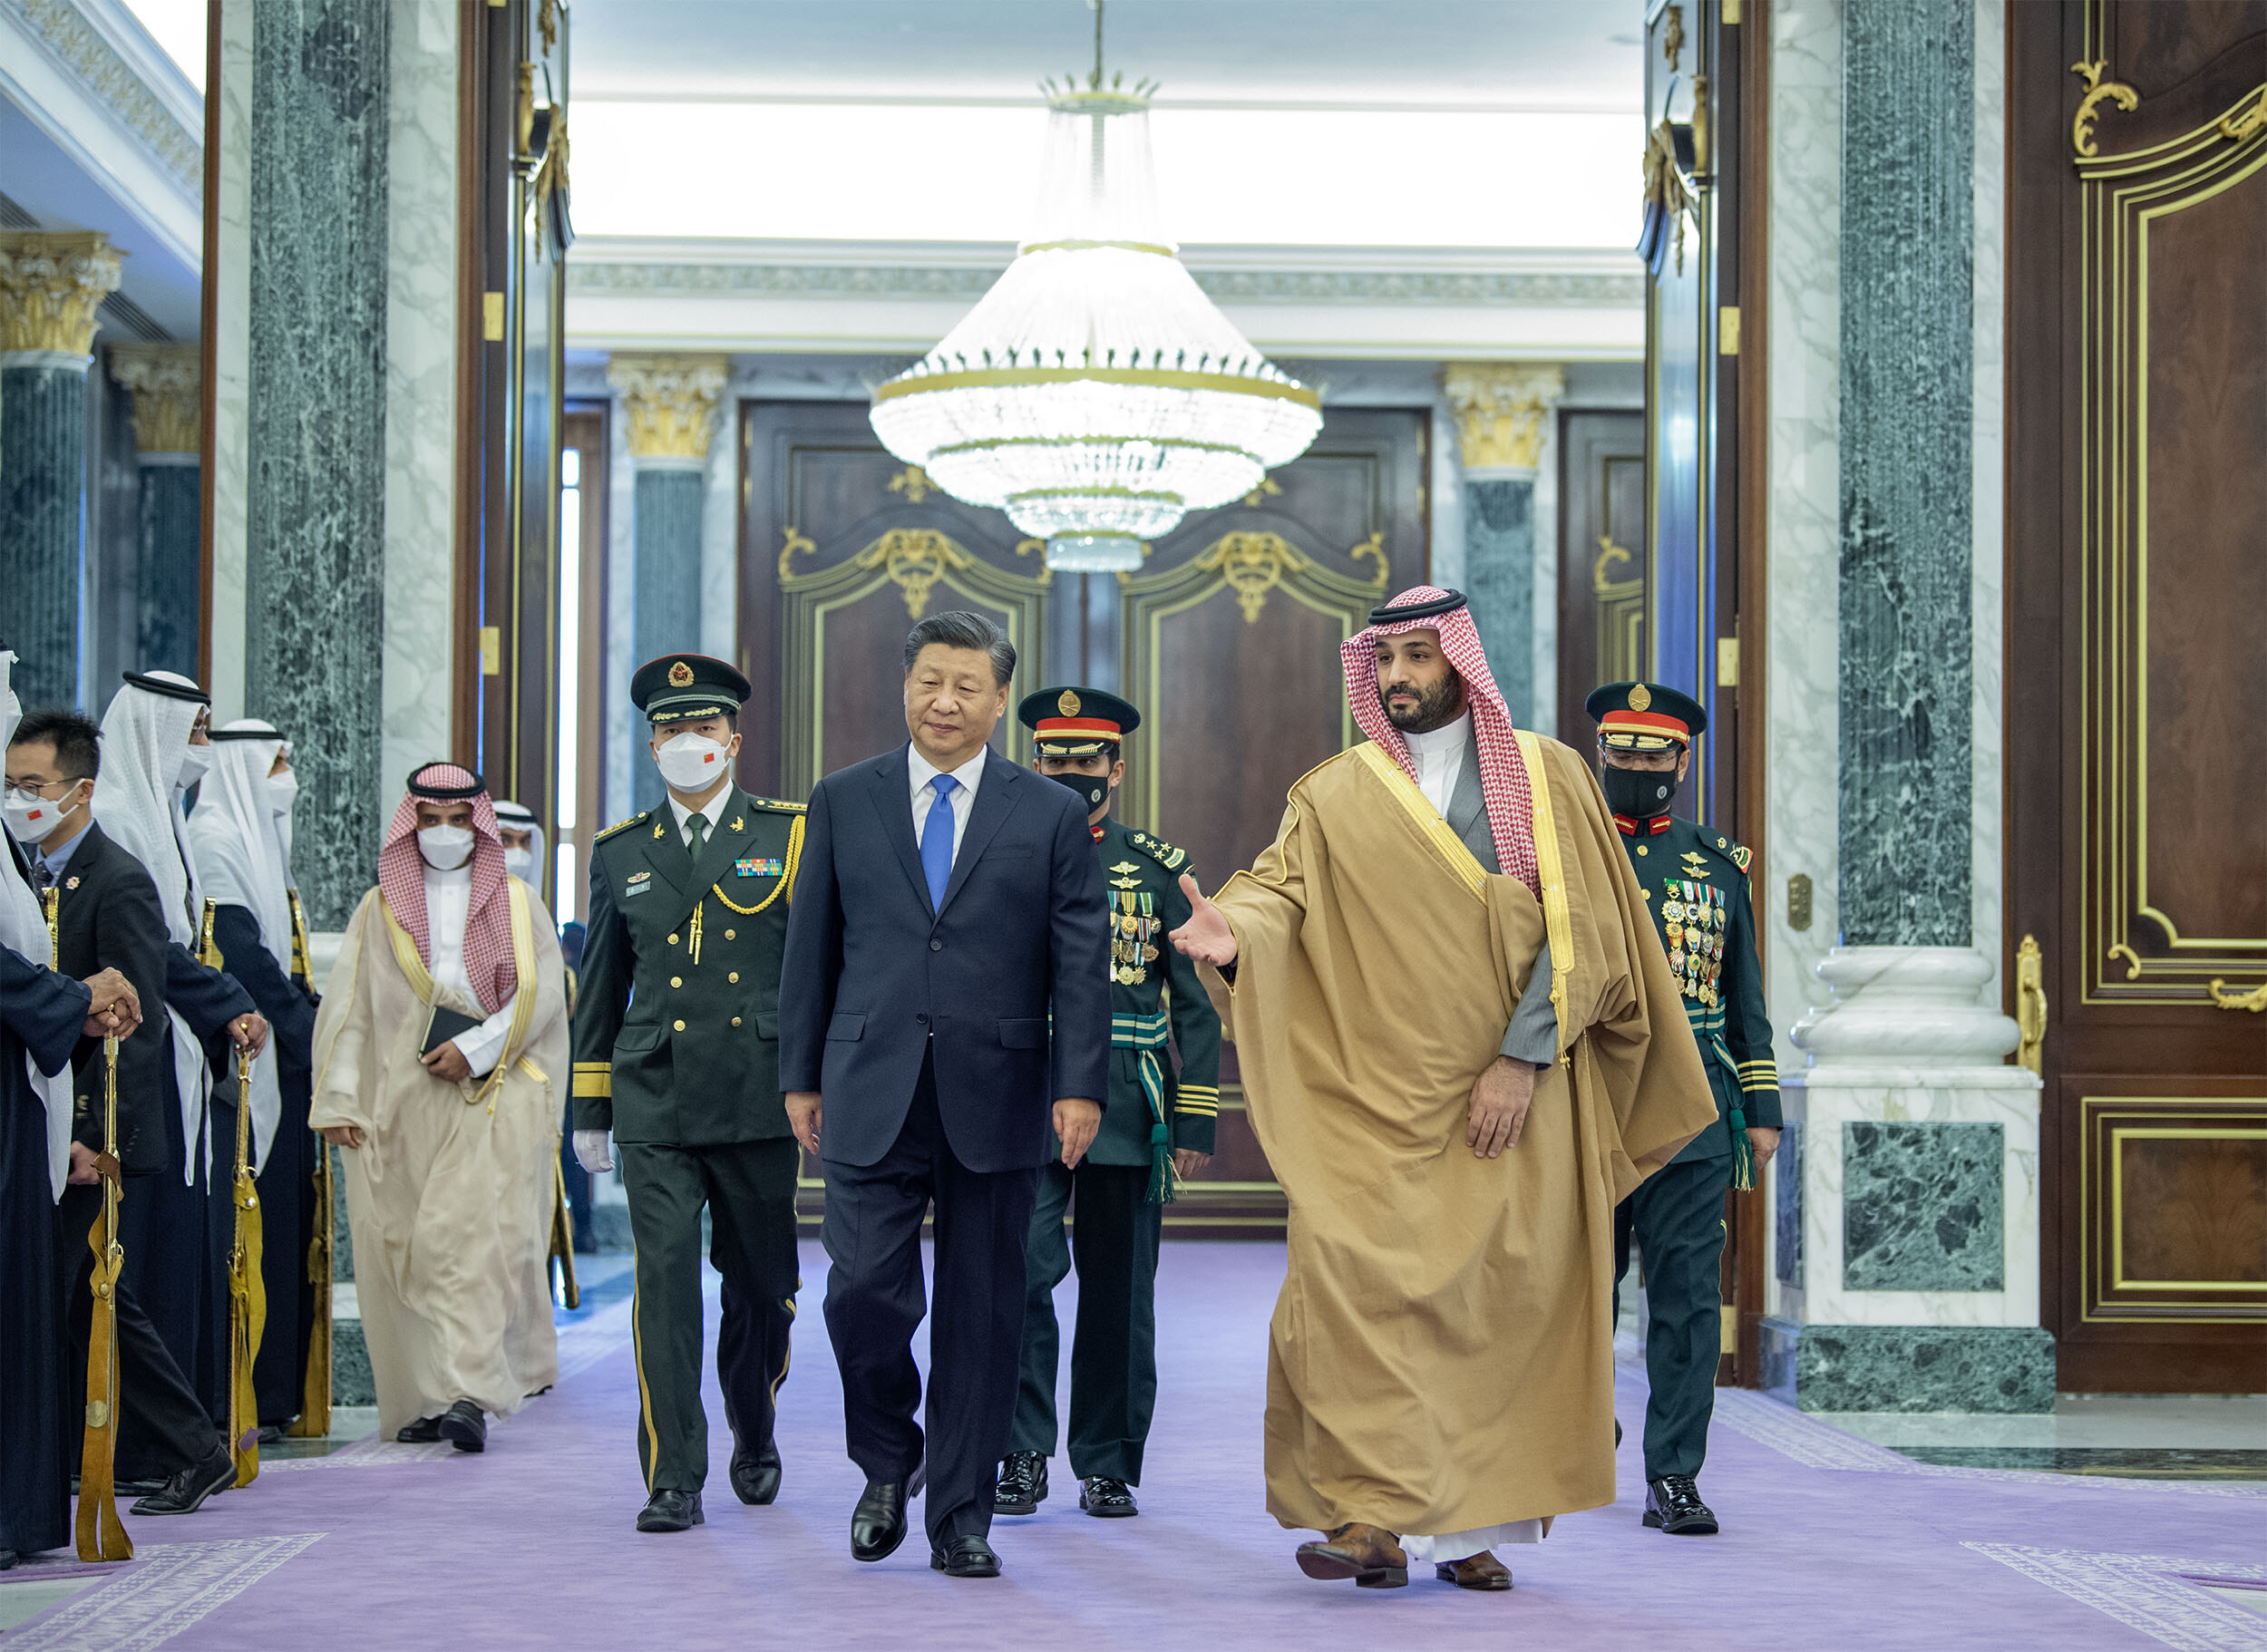 Chinese leader Xi Jinping meets Crown Prince of Saudi Arabia Mohammed bin Salman Al Saud following an official welcoming ceremony in Riyadh on Dec. 8. Thanks to Russia’s war on Ukraine, Gulf states have been exercising greater geopolitical power over the past year.